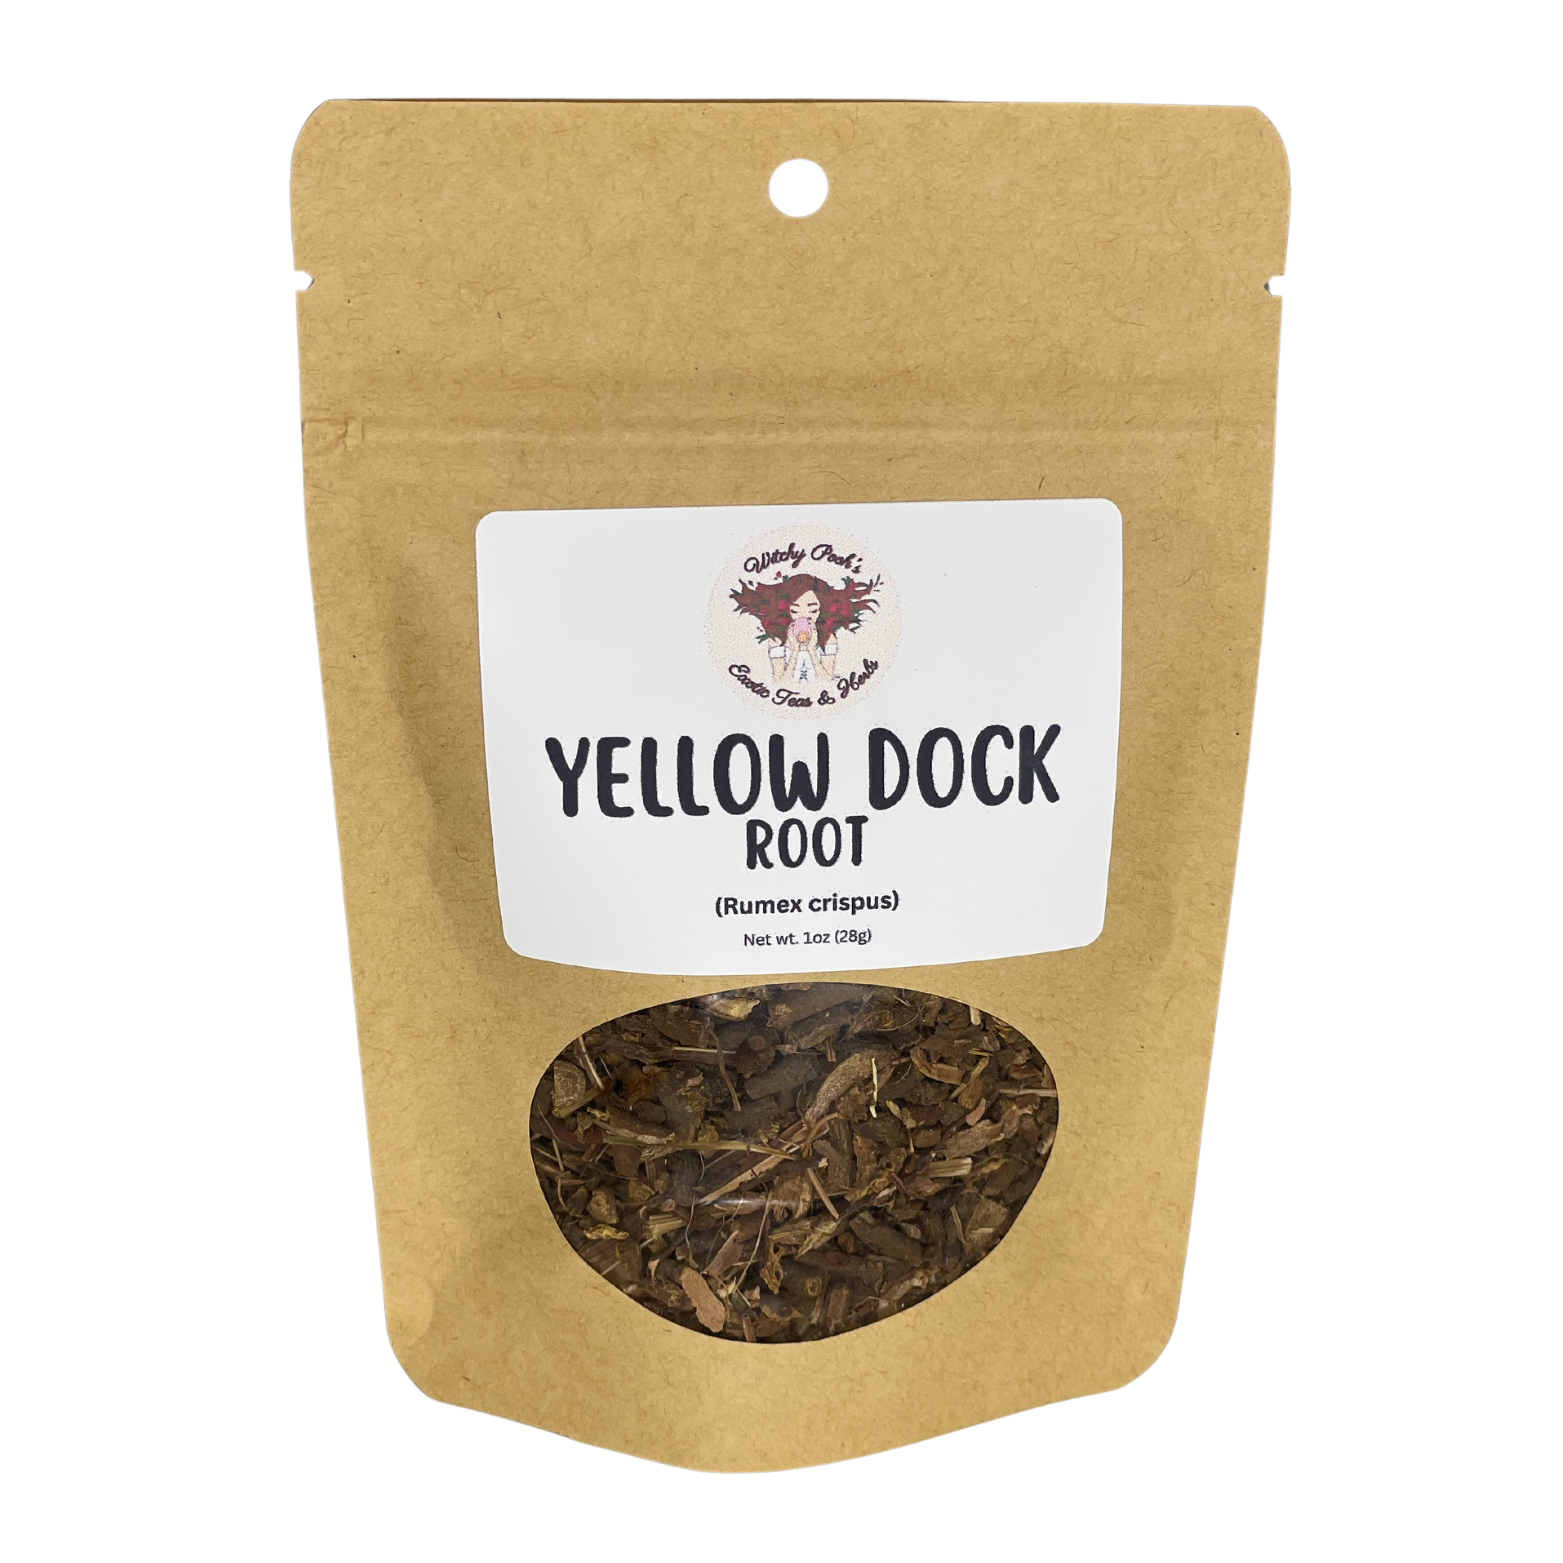 Witchy Pooh's Yellow Dock Root For Blood Purification, Smudging For Ritual to Release Past Traumas-1